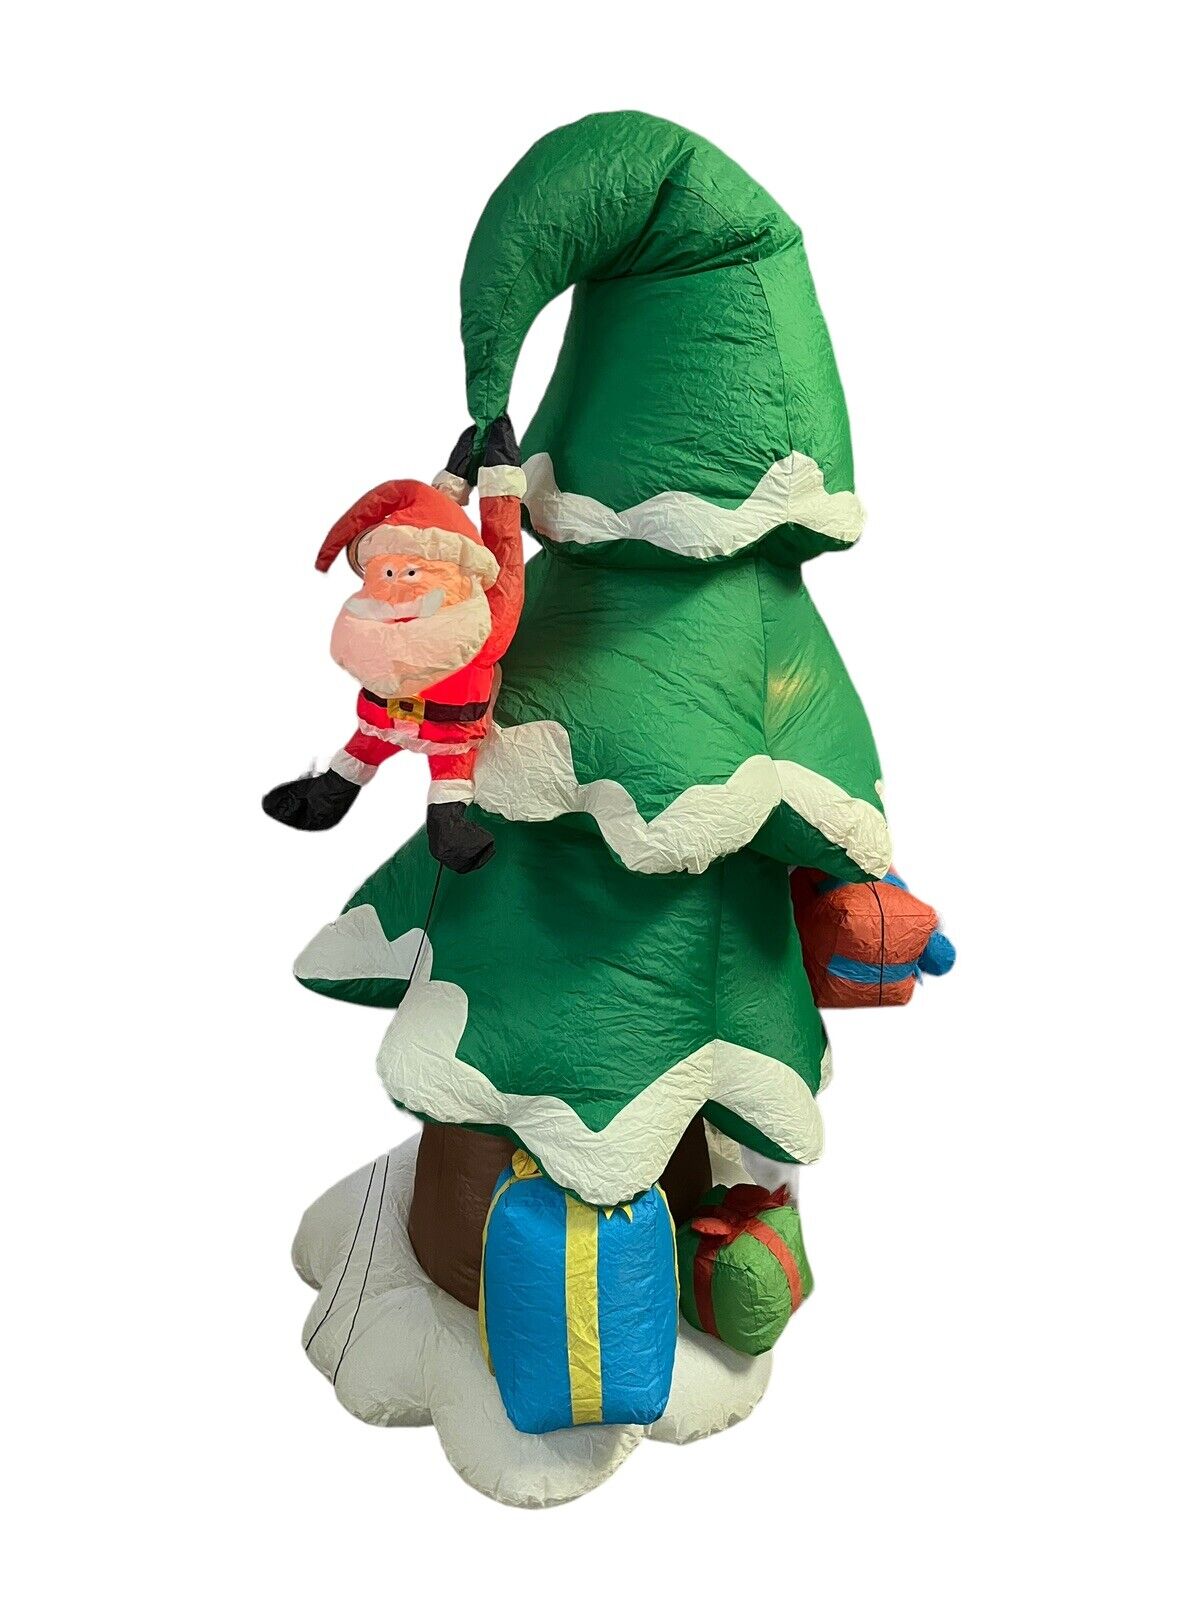 2008 Gemmy 8’ Santa Crashing Into Tree Lighted Christmas Inflatable Airblown